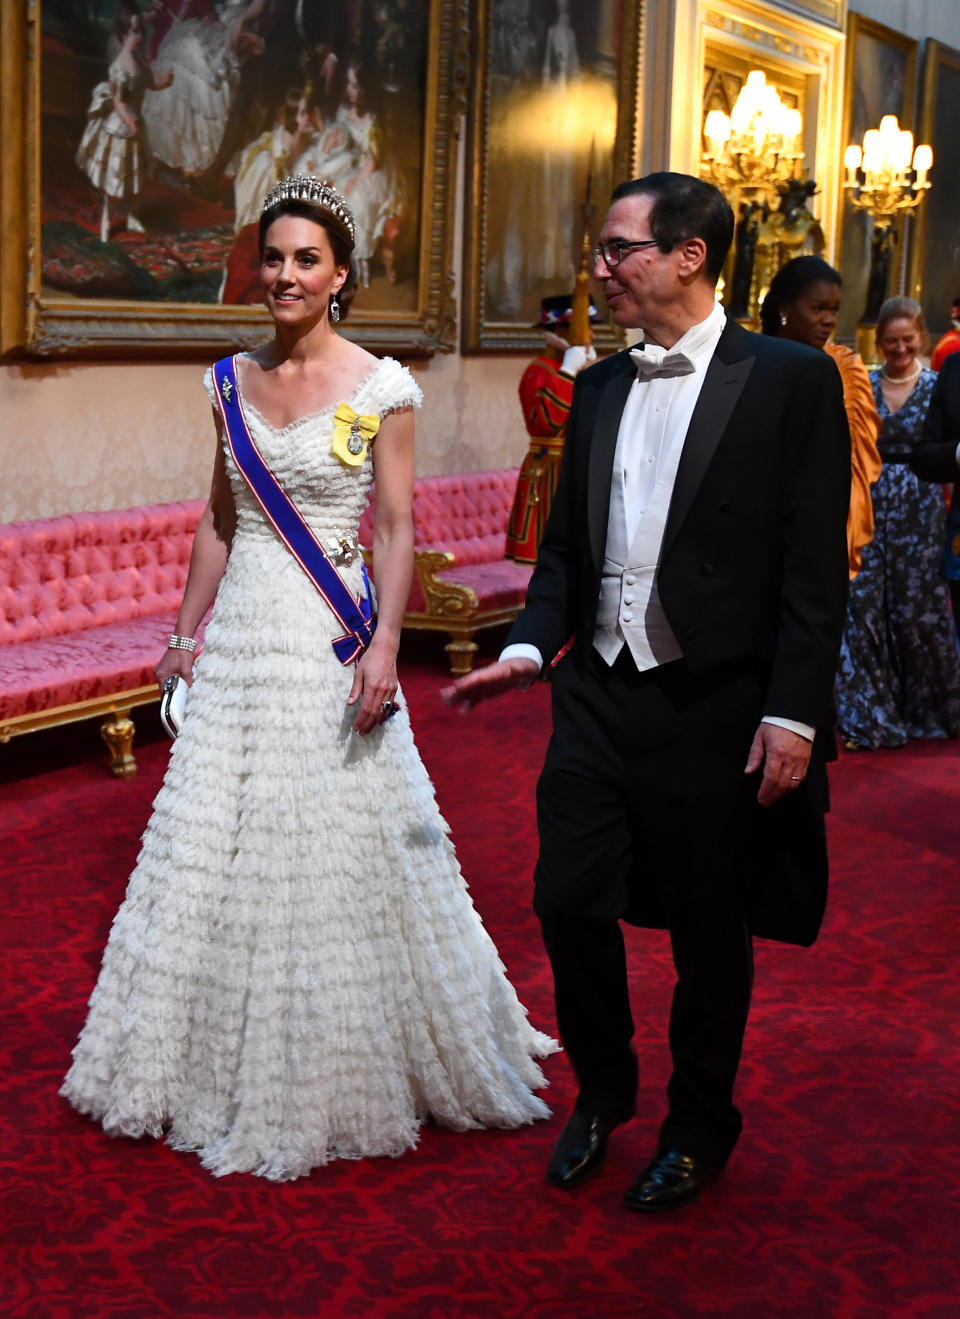 The duchess and U.S. Treasury Secretary Steven Mnuchin at the East Gallery for a state banquet at Buckingham Palace on June 3.